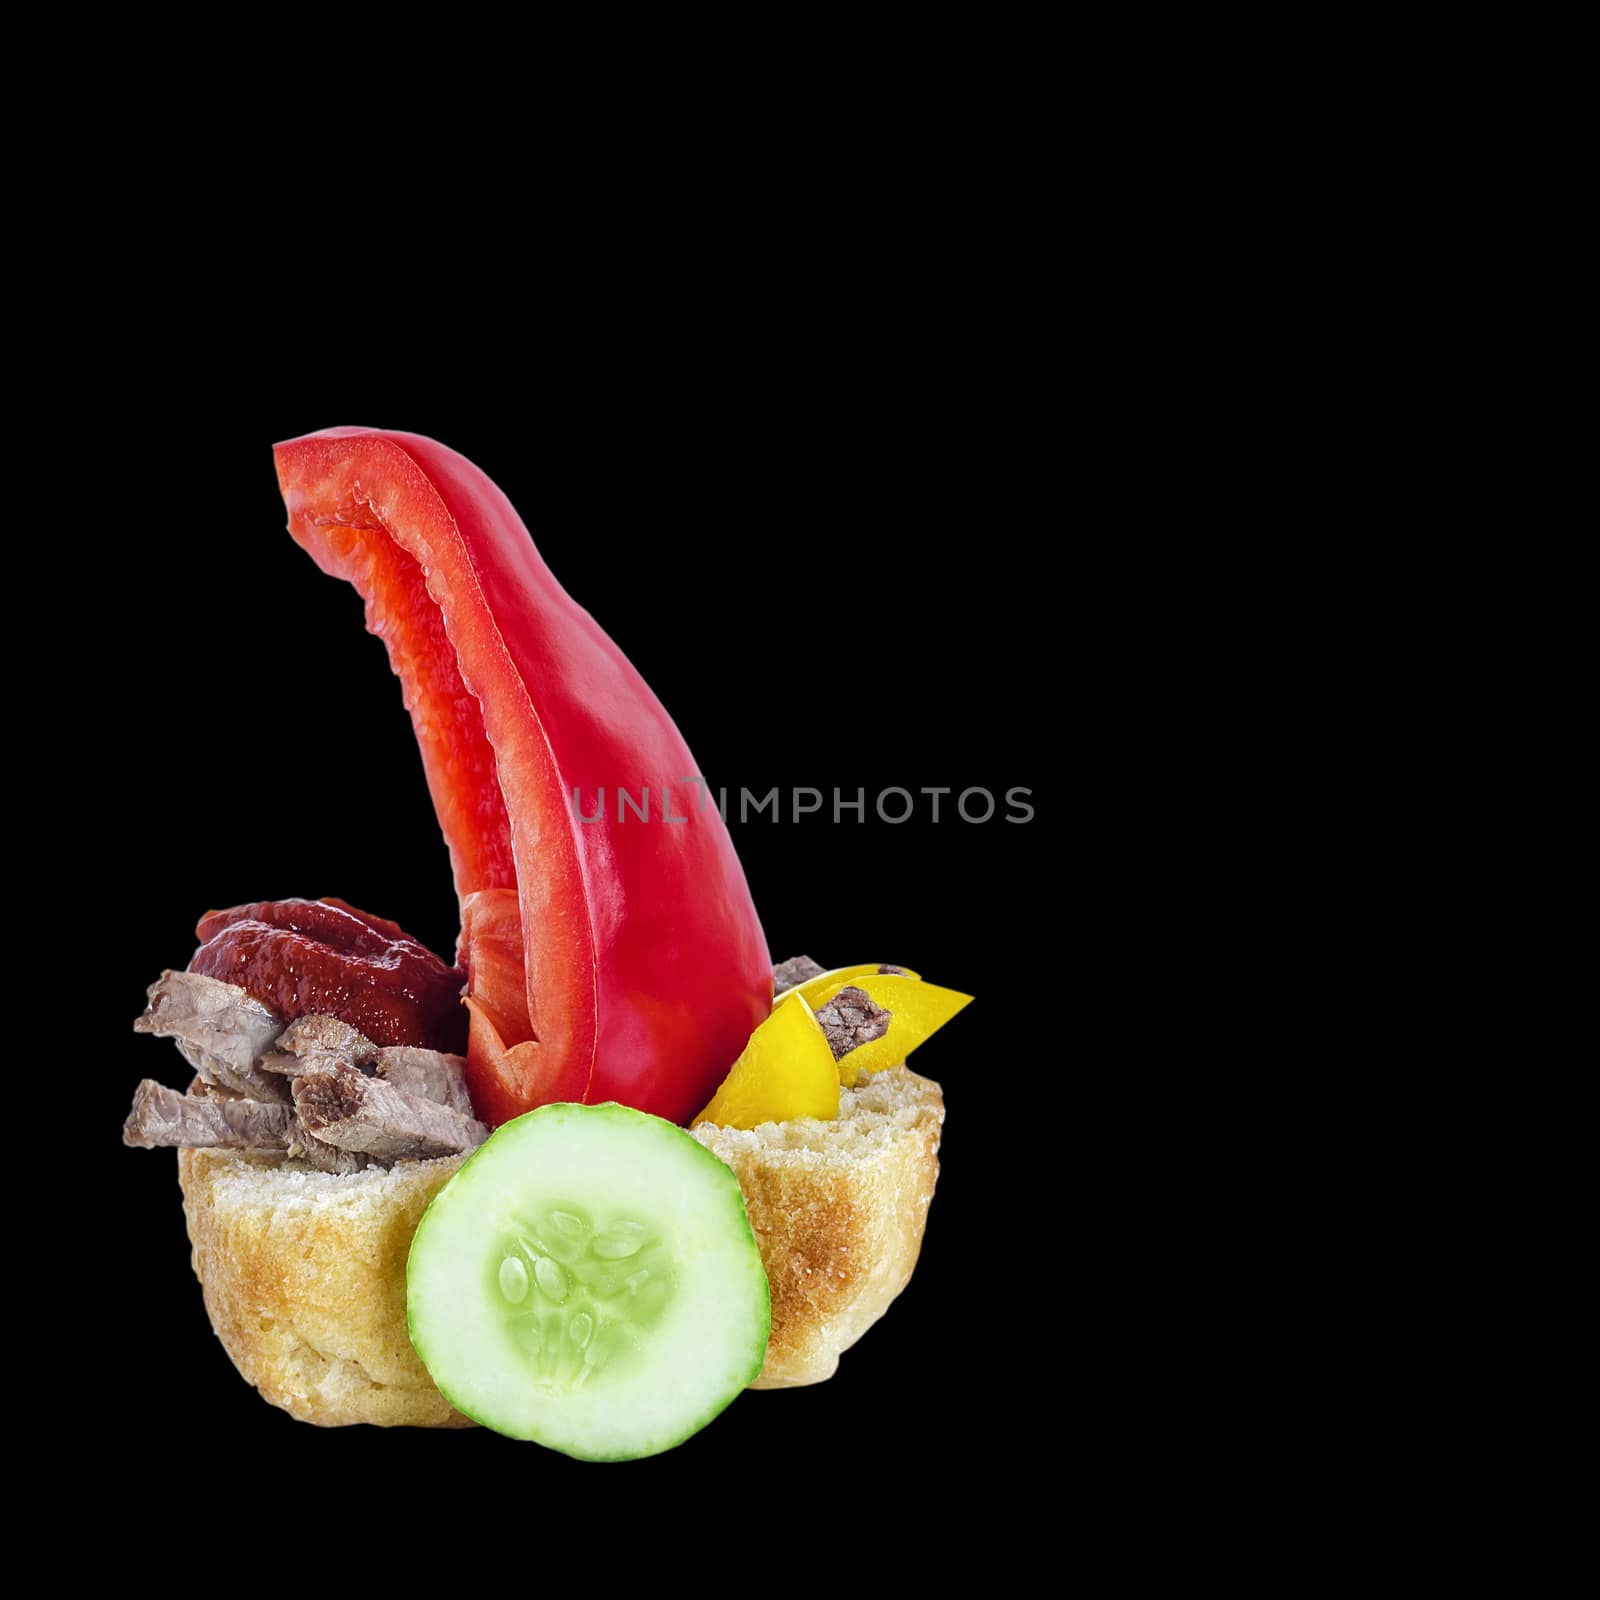 Sandwich with meat and vegetables, ketchup on a black background by Gaina